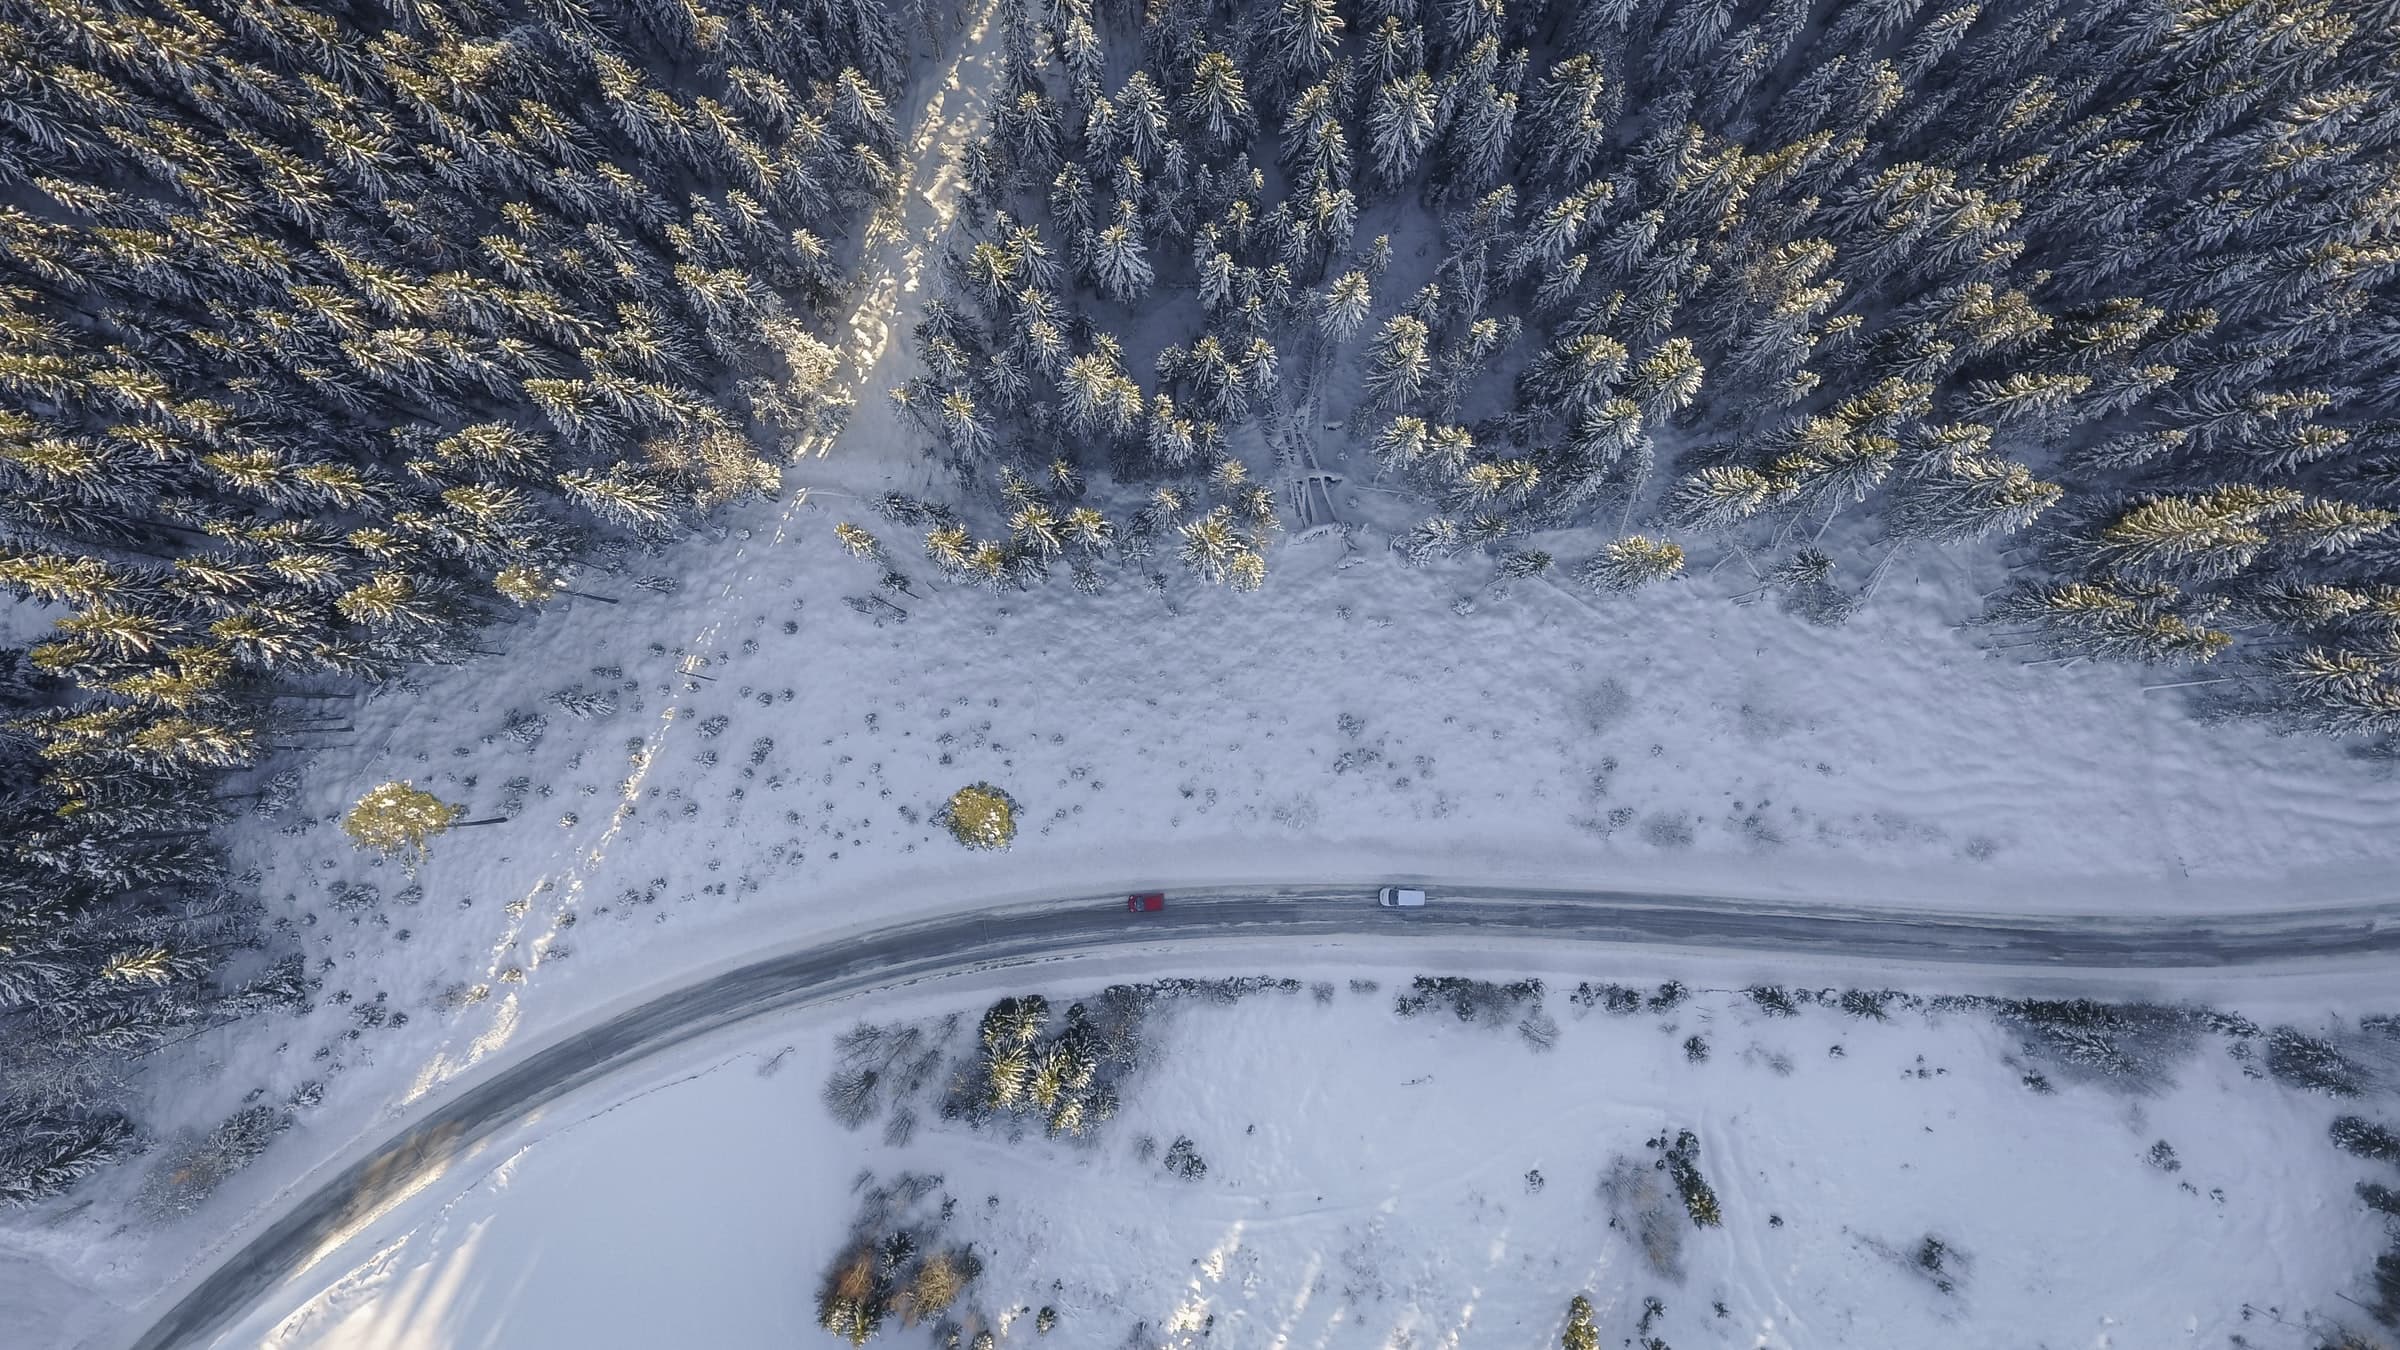 Arial view of two cars driving down a snowy, windy road